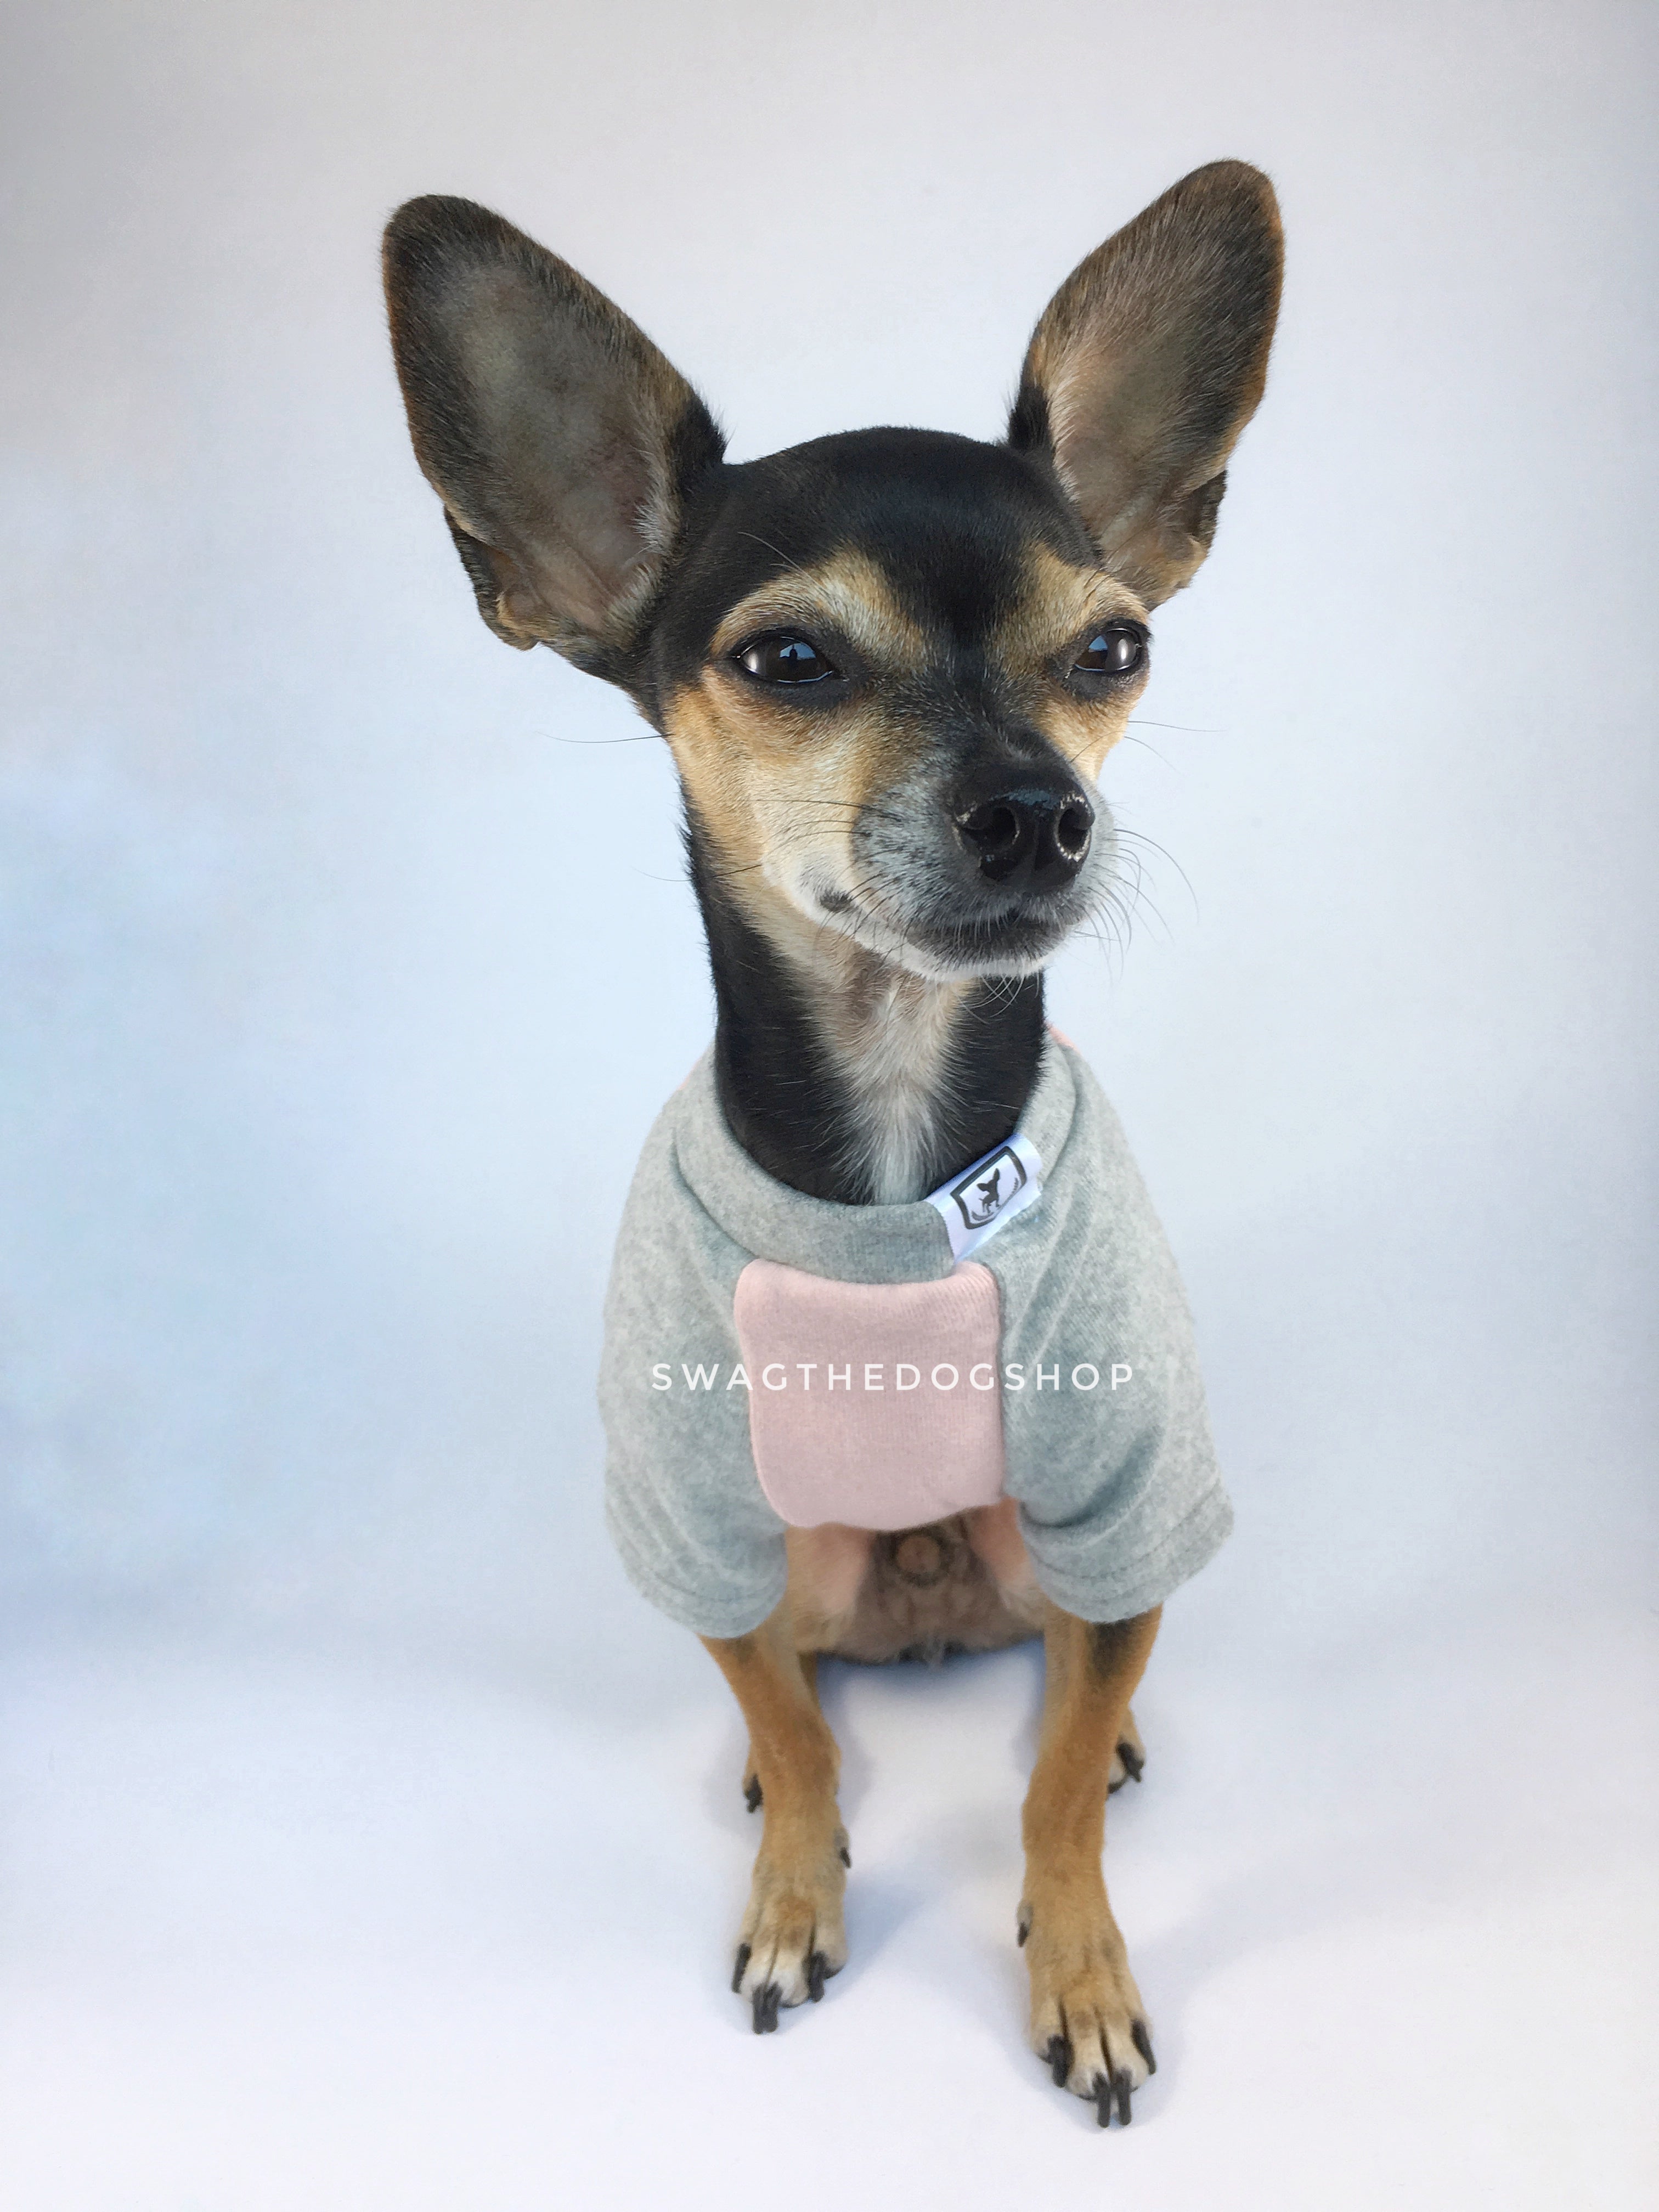 Pink and Gray Centerfield Tees T-Shirt - Cute Chihuahua Dog Wearing T-Shirt Full Front View. Pink and Gray T-Shirt